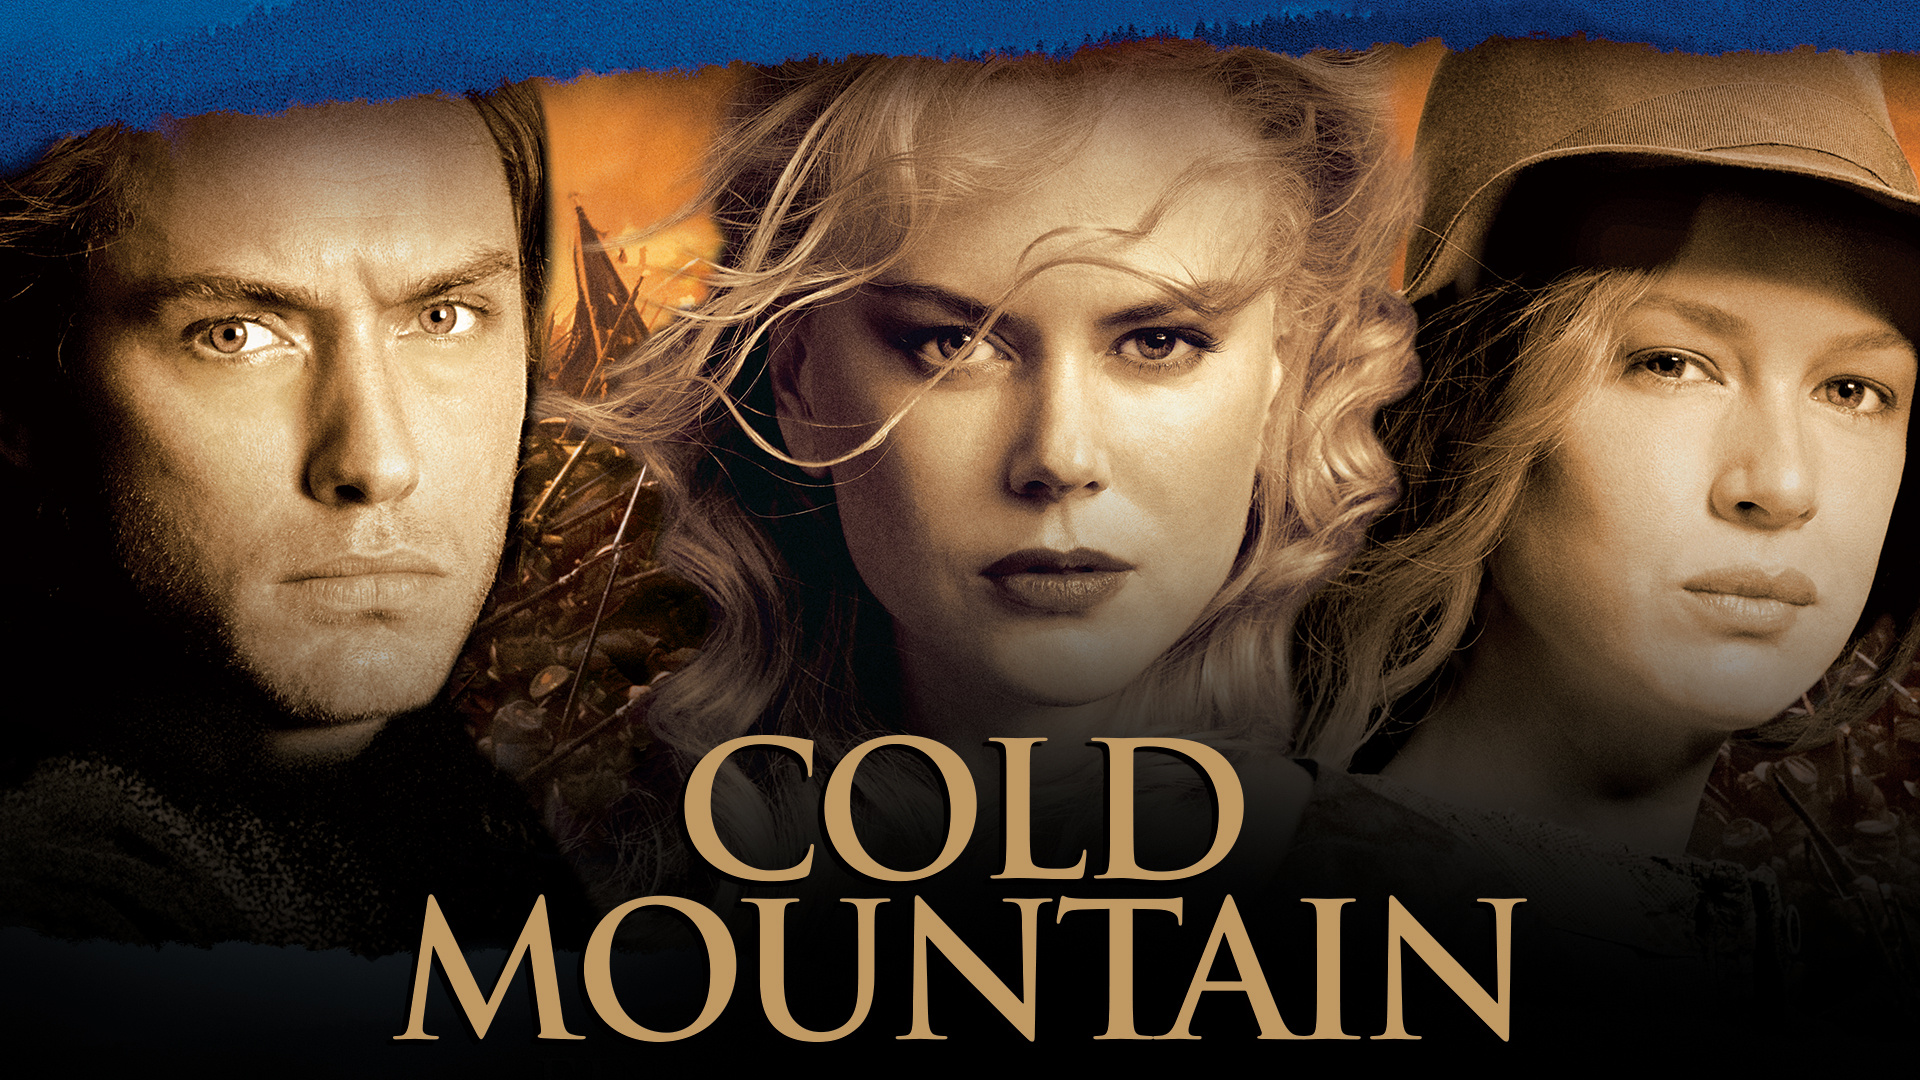 Cold Mountain, Movie HQ, Pictures 4K, 2019, 1920x1080 Full HD Desktop